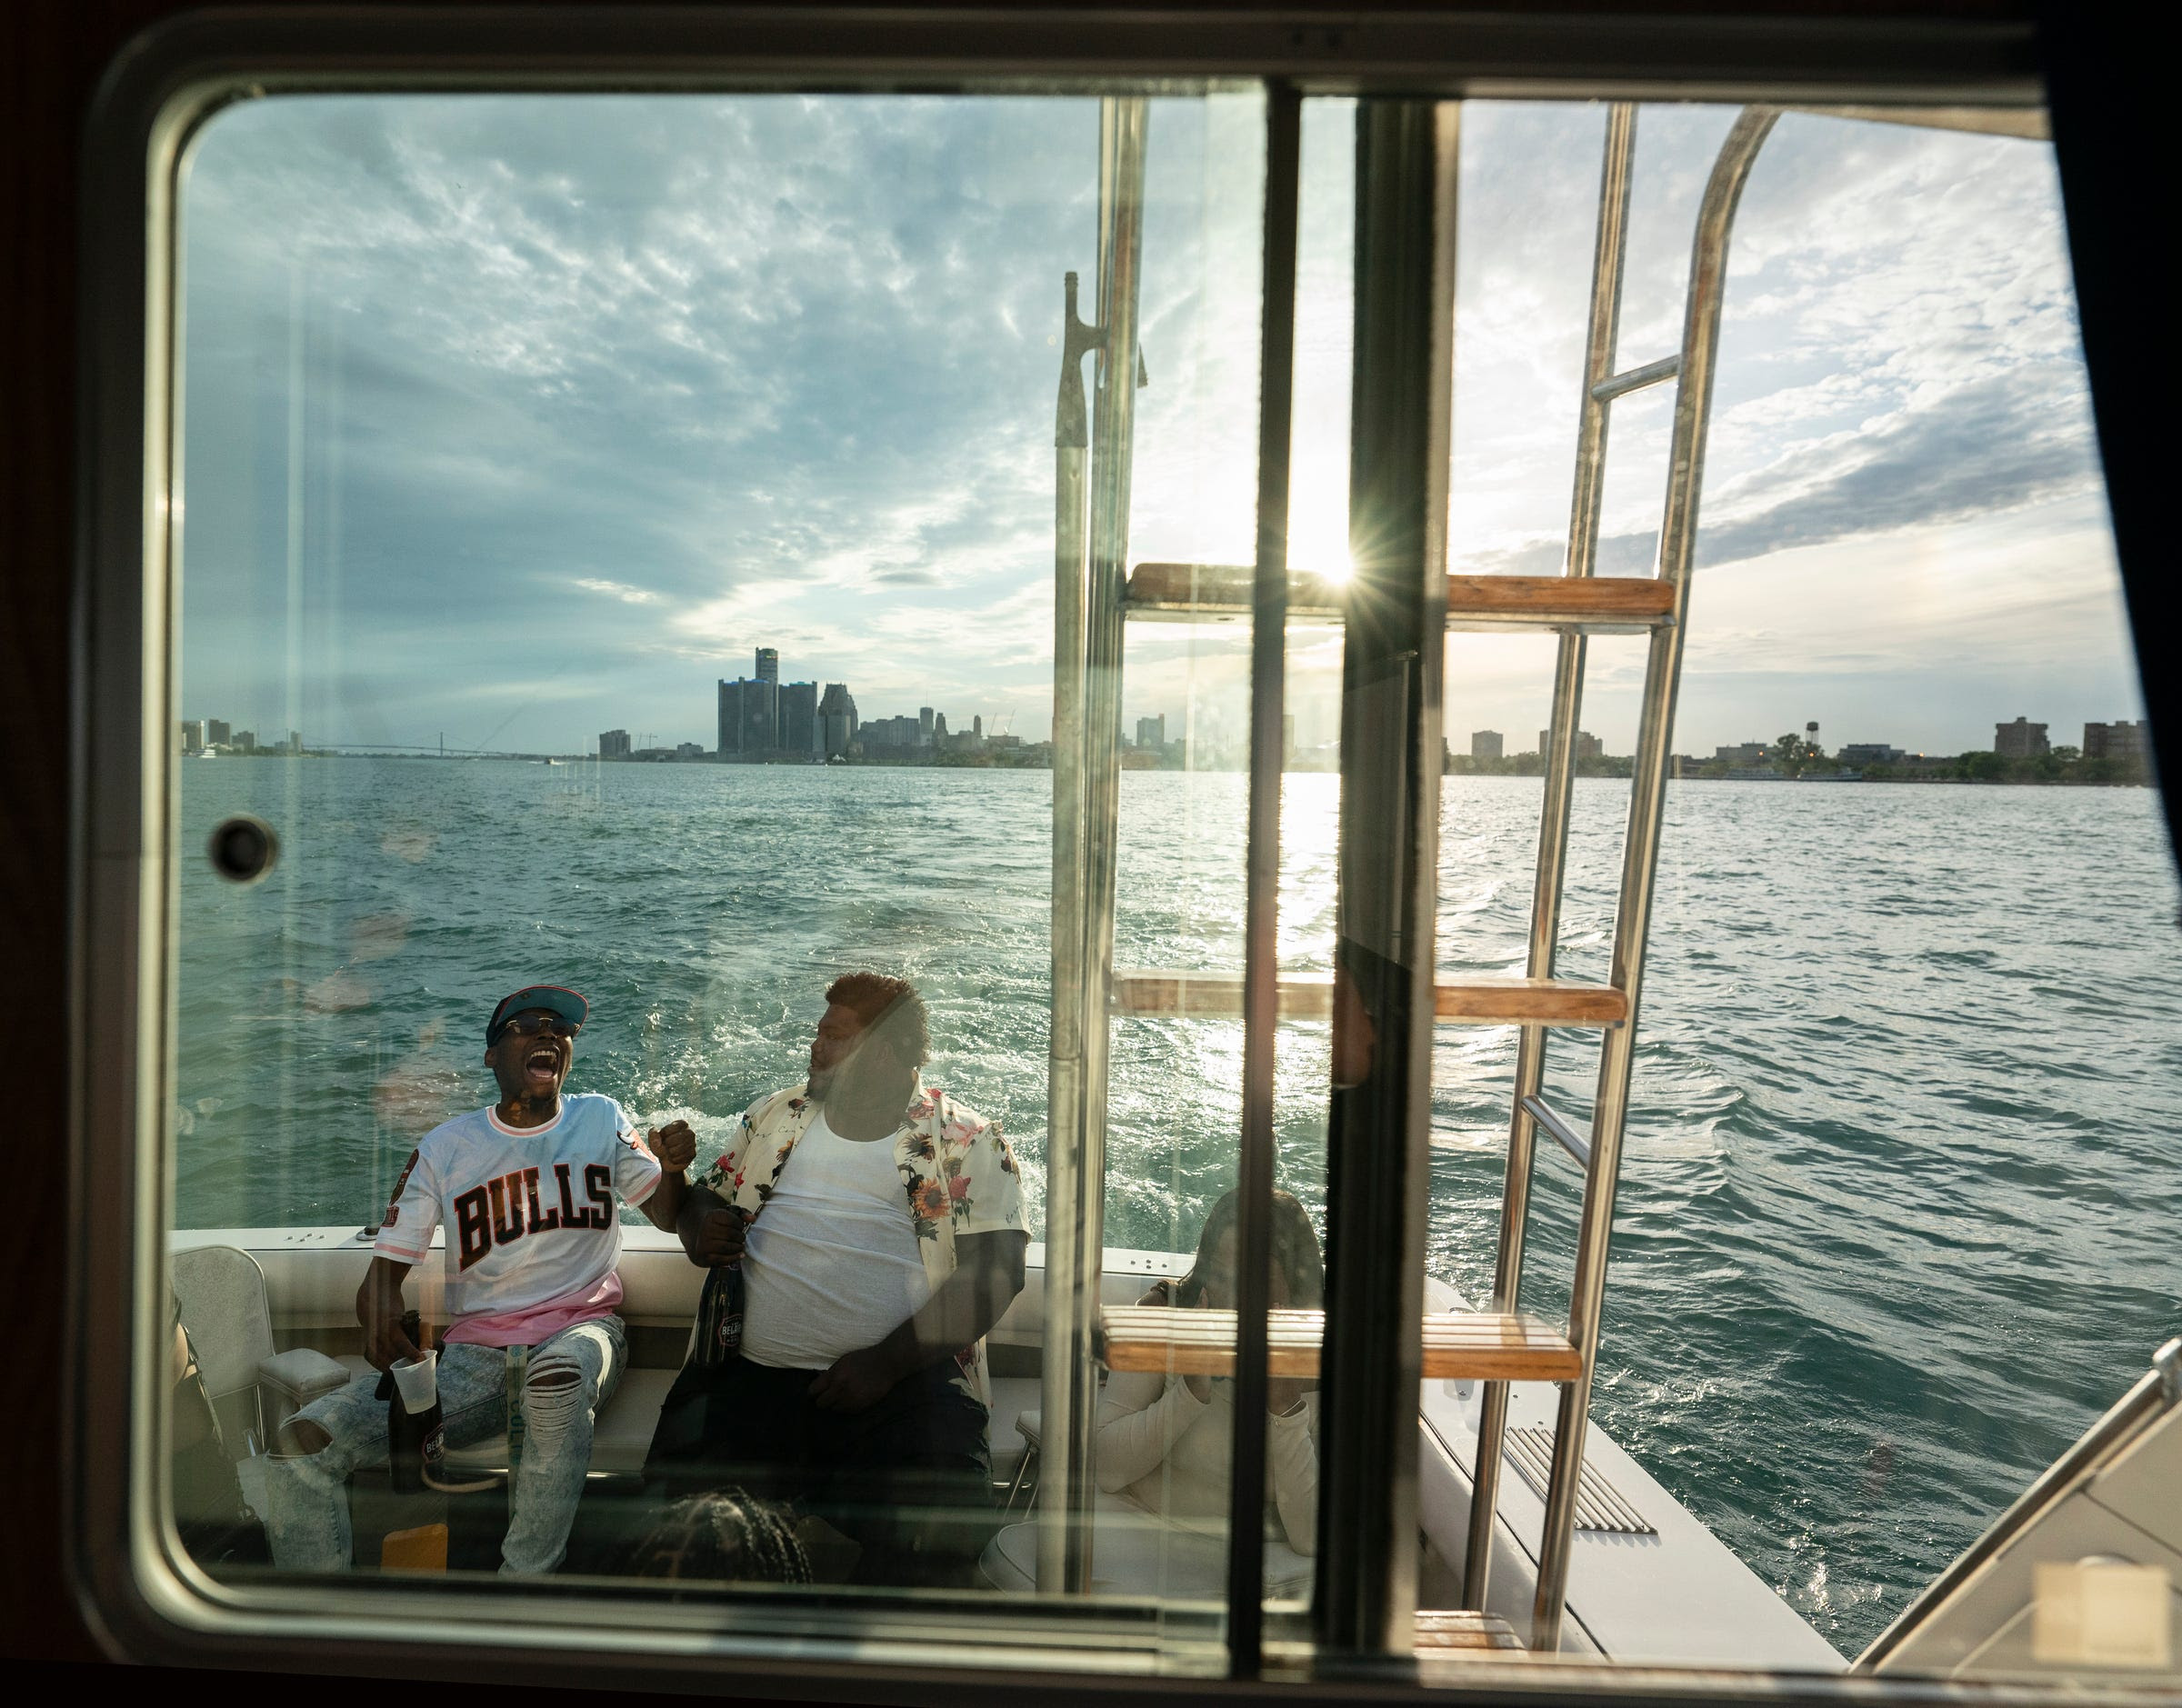 Jalen Miller, 26, of Detroit, left, laughs with Drew Roberts, 26, of Lincoln Park, as they return to the Grayhaven State Harbor marina after chartering a boat through Riverwise Detroit Boat Tours on Saturday, June 4, 2022.